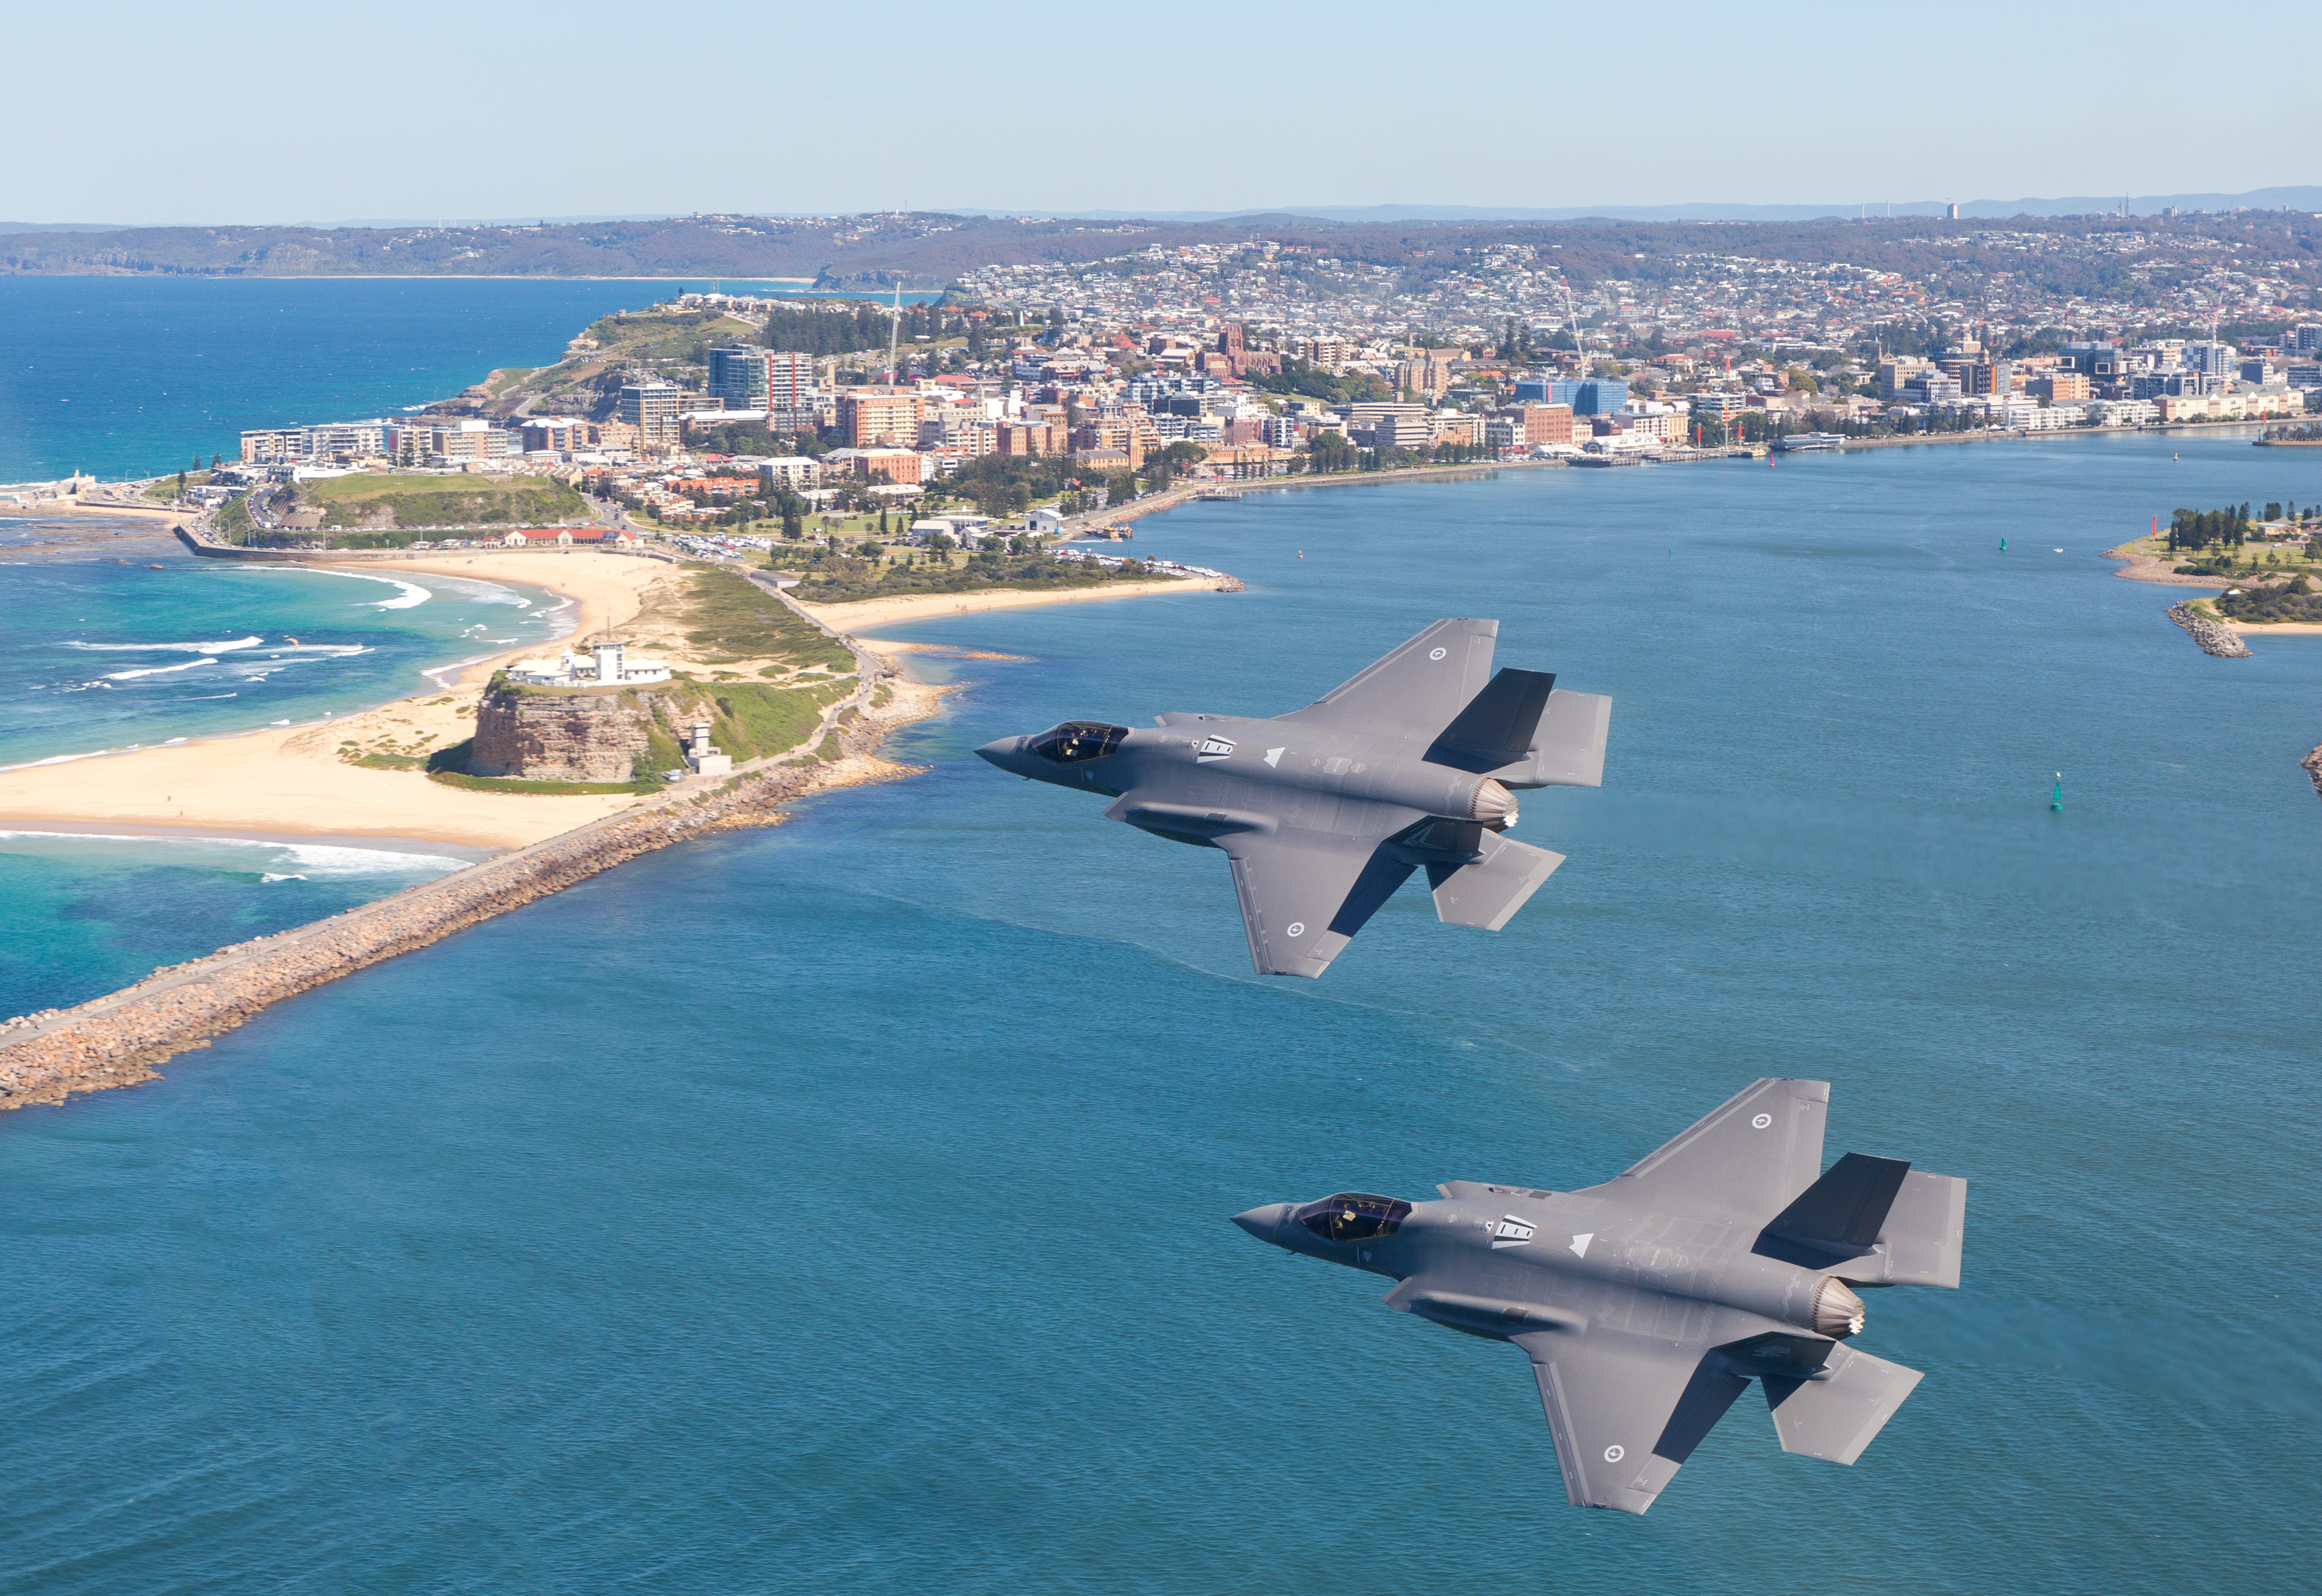 RAAF F-35A [Commonwealth of Australia - Department of Defence/Sgt David Gibbs]